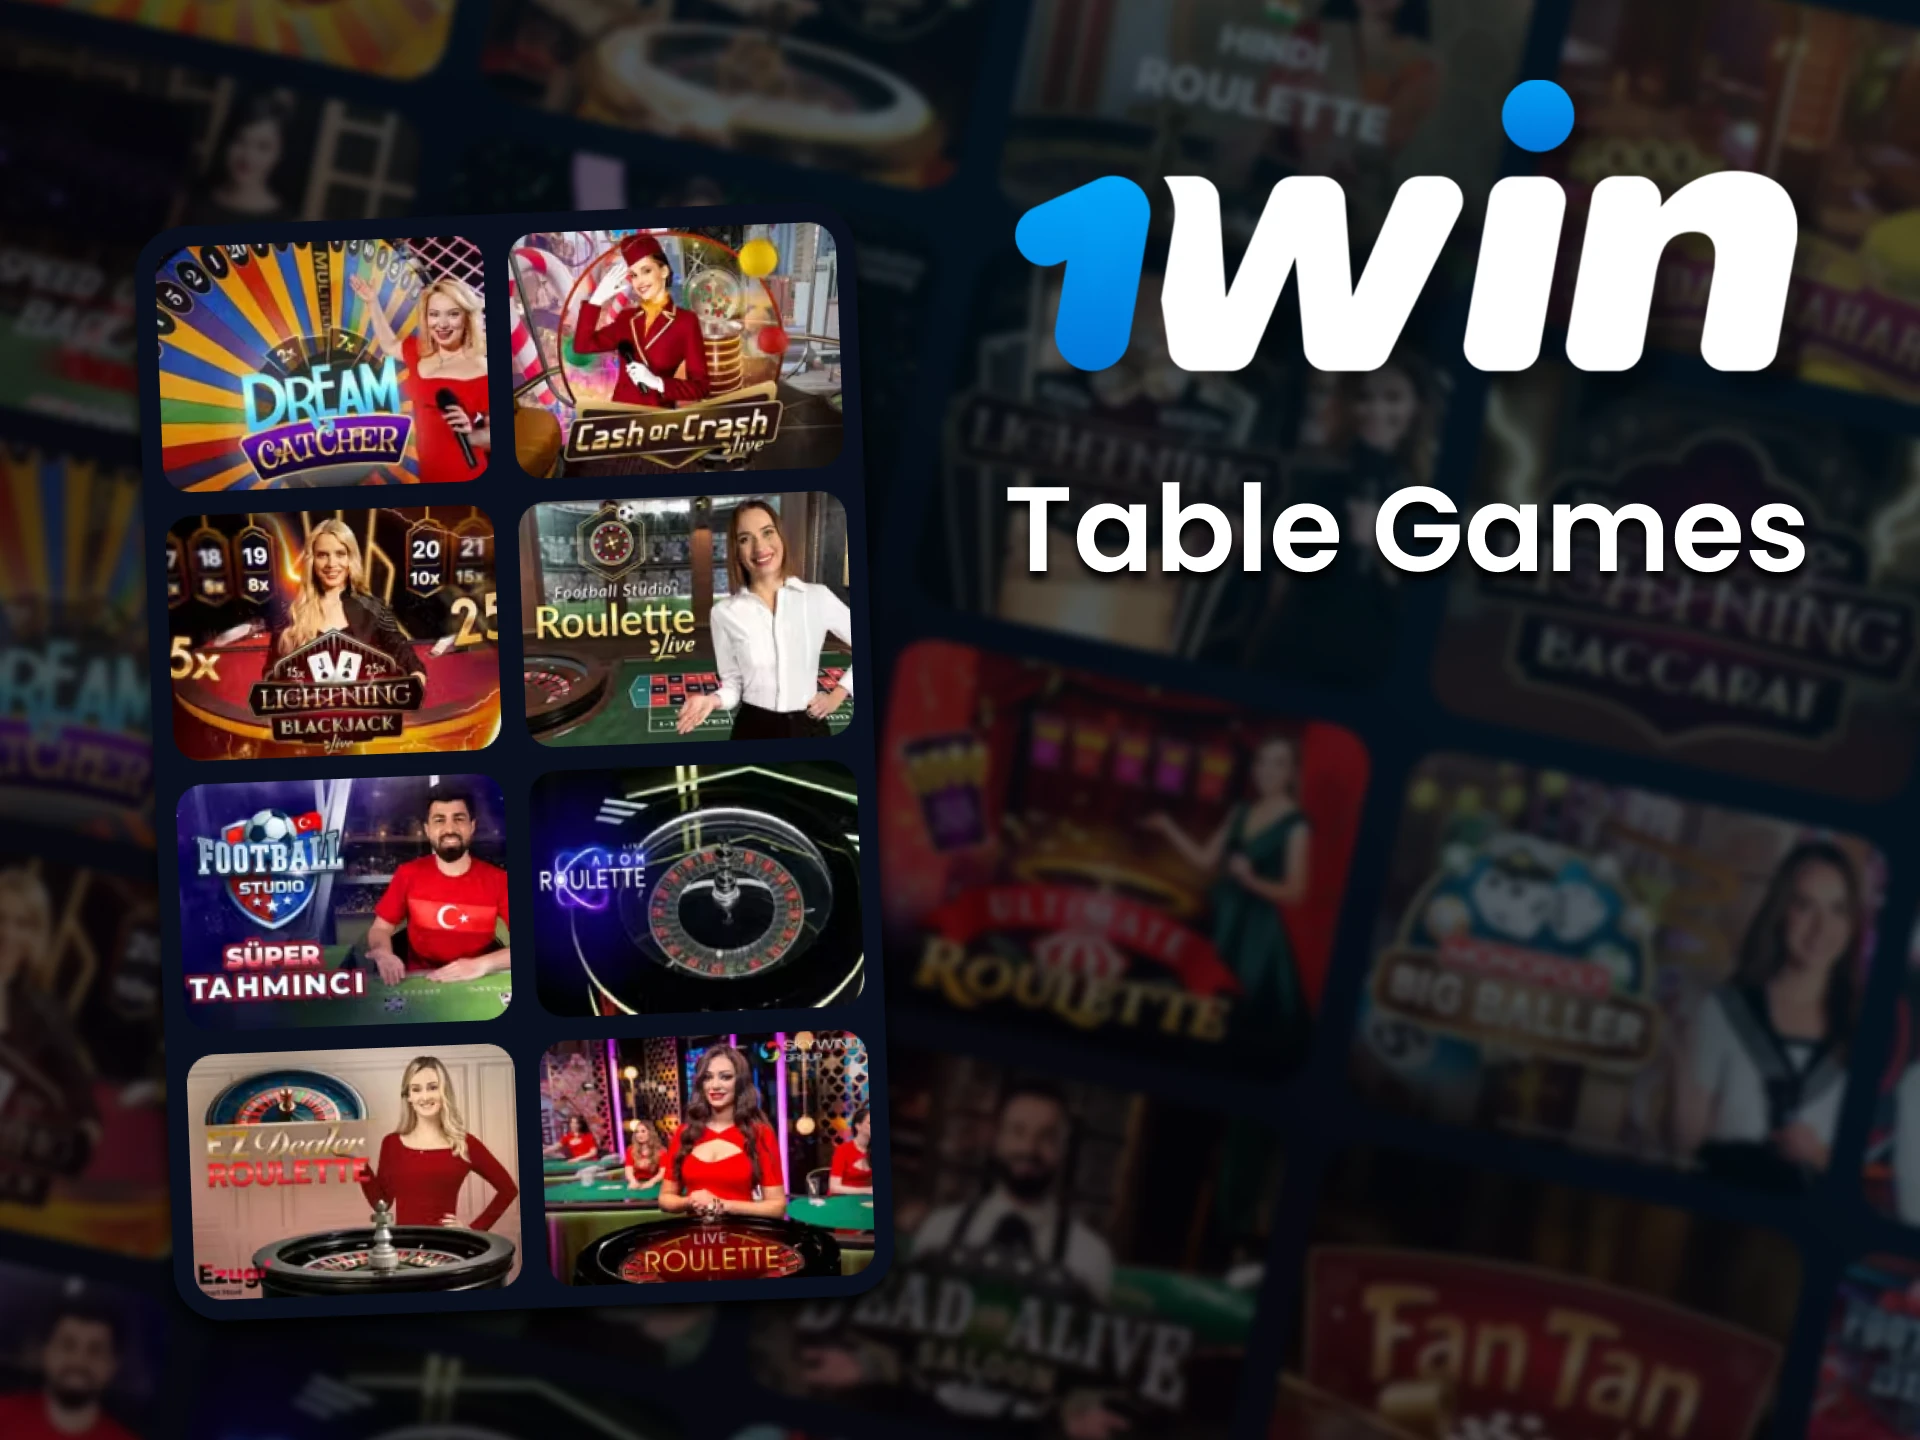 For casino games at 1win choose Table Games.